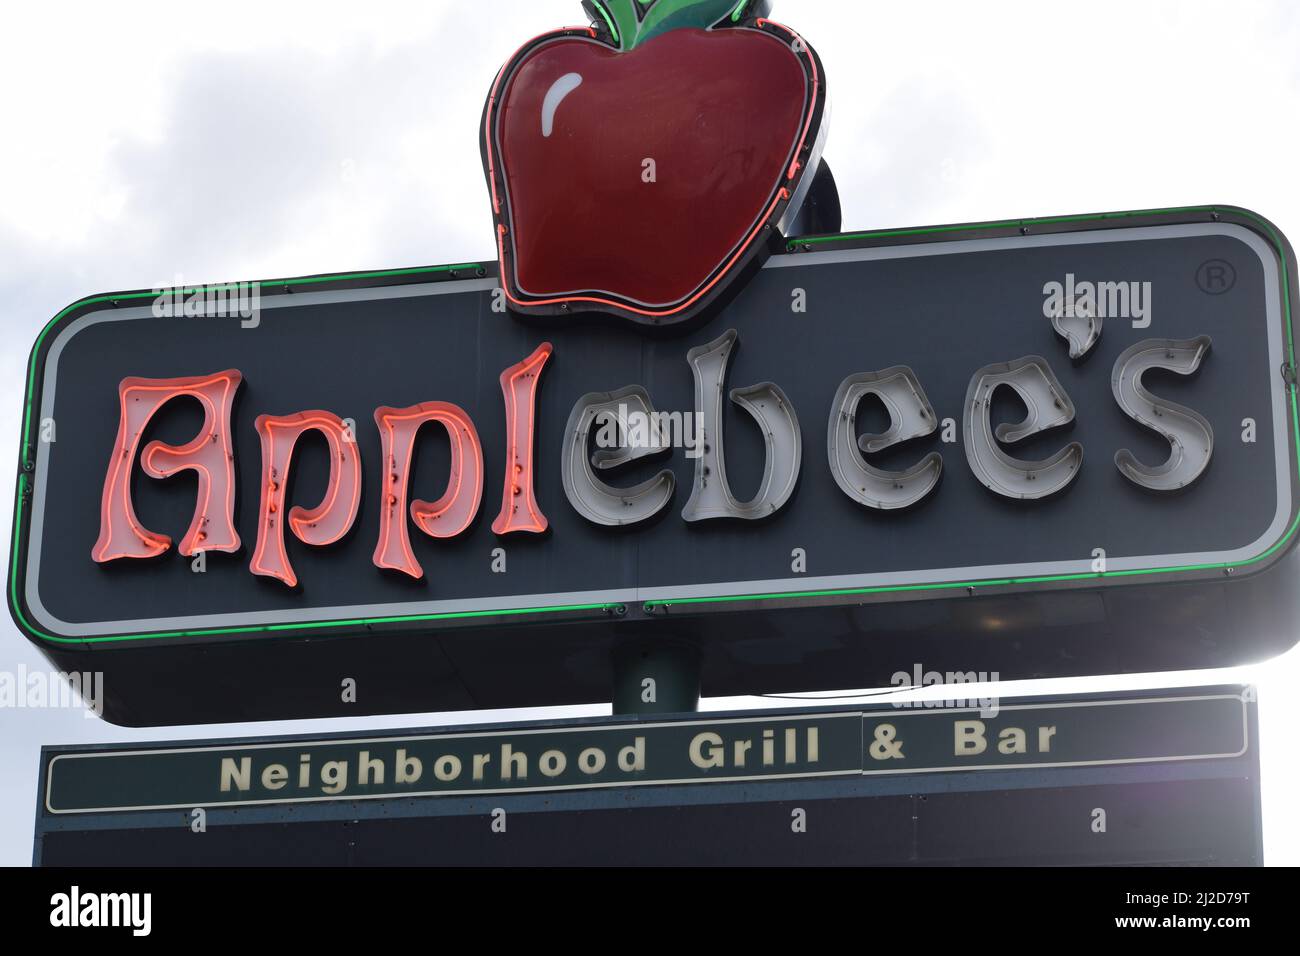 Applebee's Neighborhood Grill & Bar sign with burned out lights - August  2021 Stock Photo - Alamy